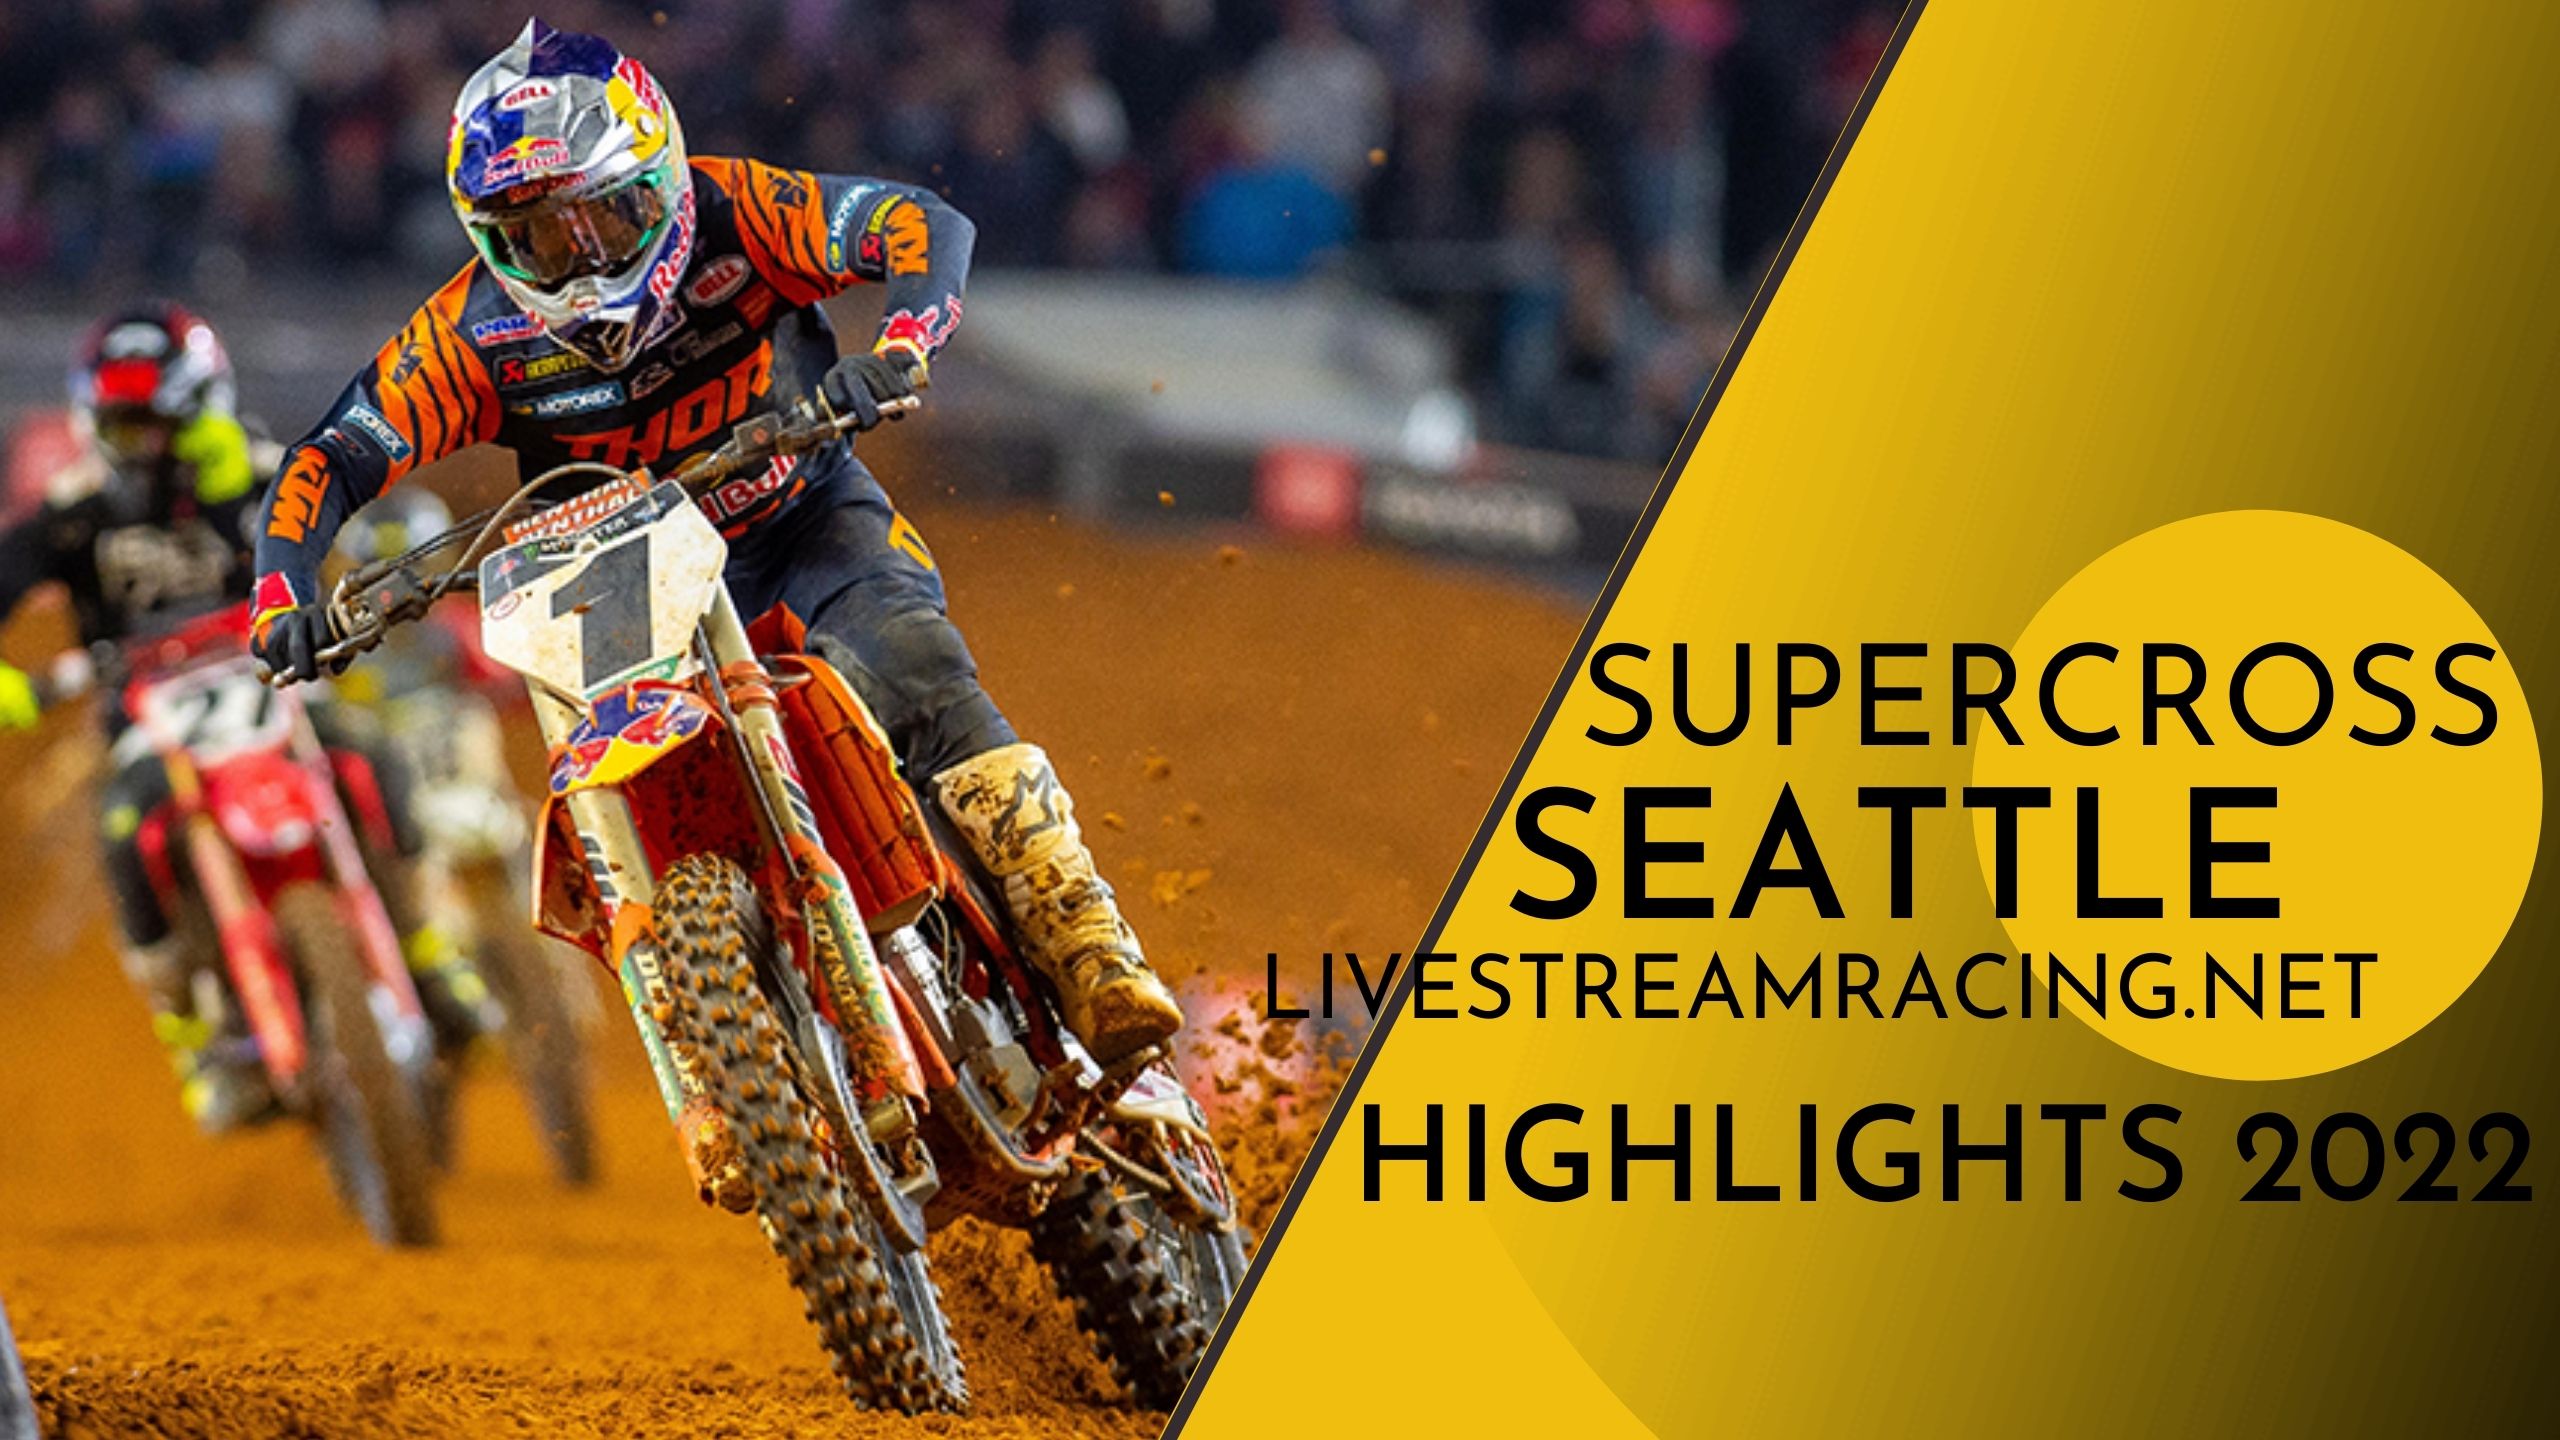 Supercross Seattle 2022 Highlights Round 12